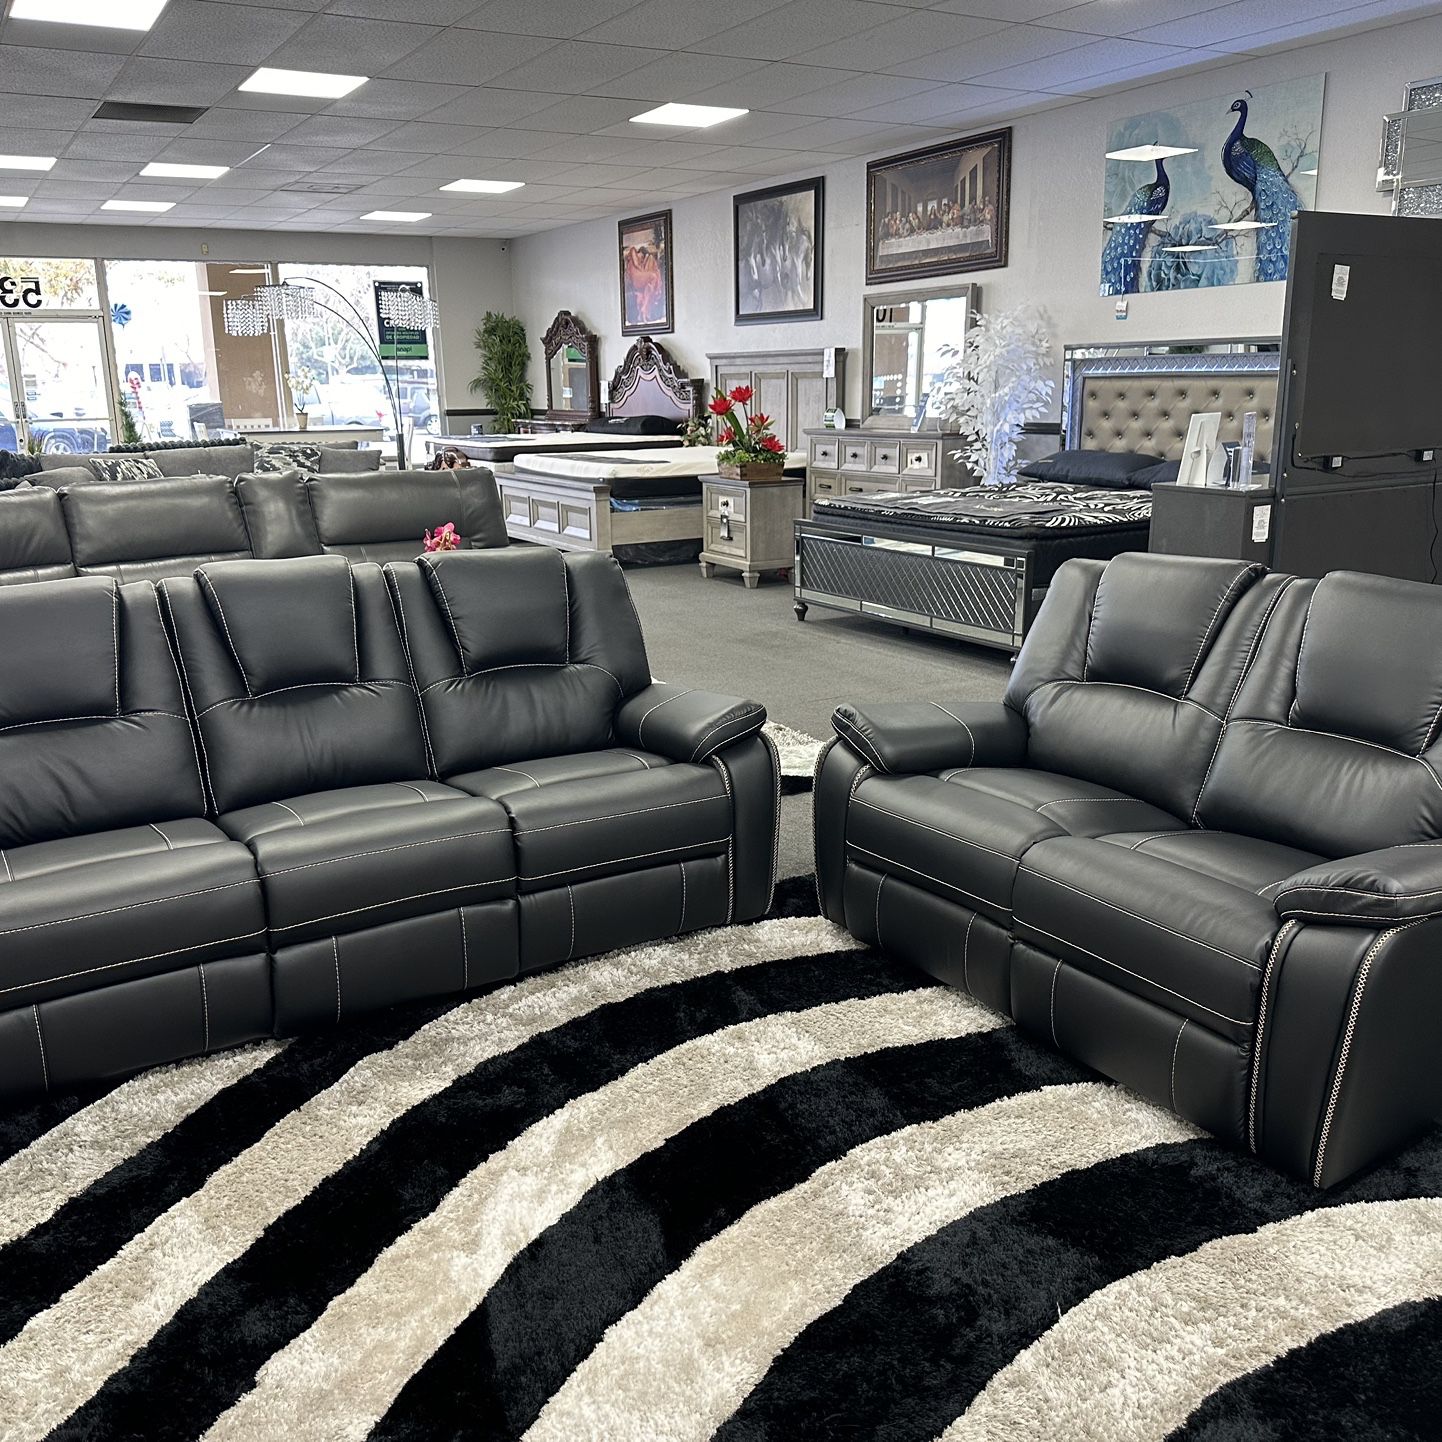 Special Deal Buy Sofa & Loveseat & Get Free Recliner Chair